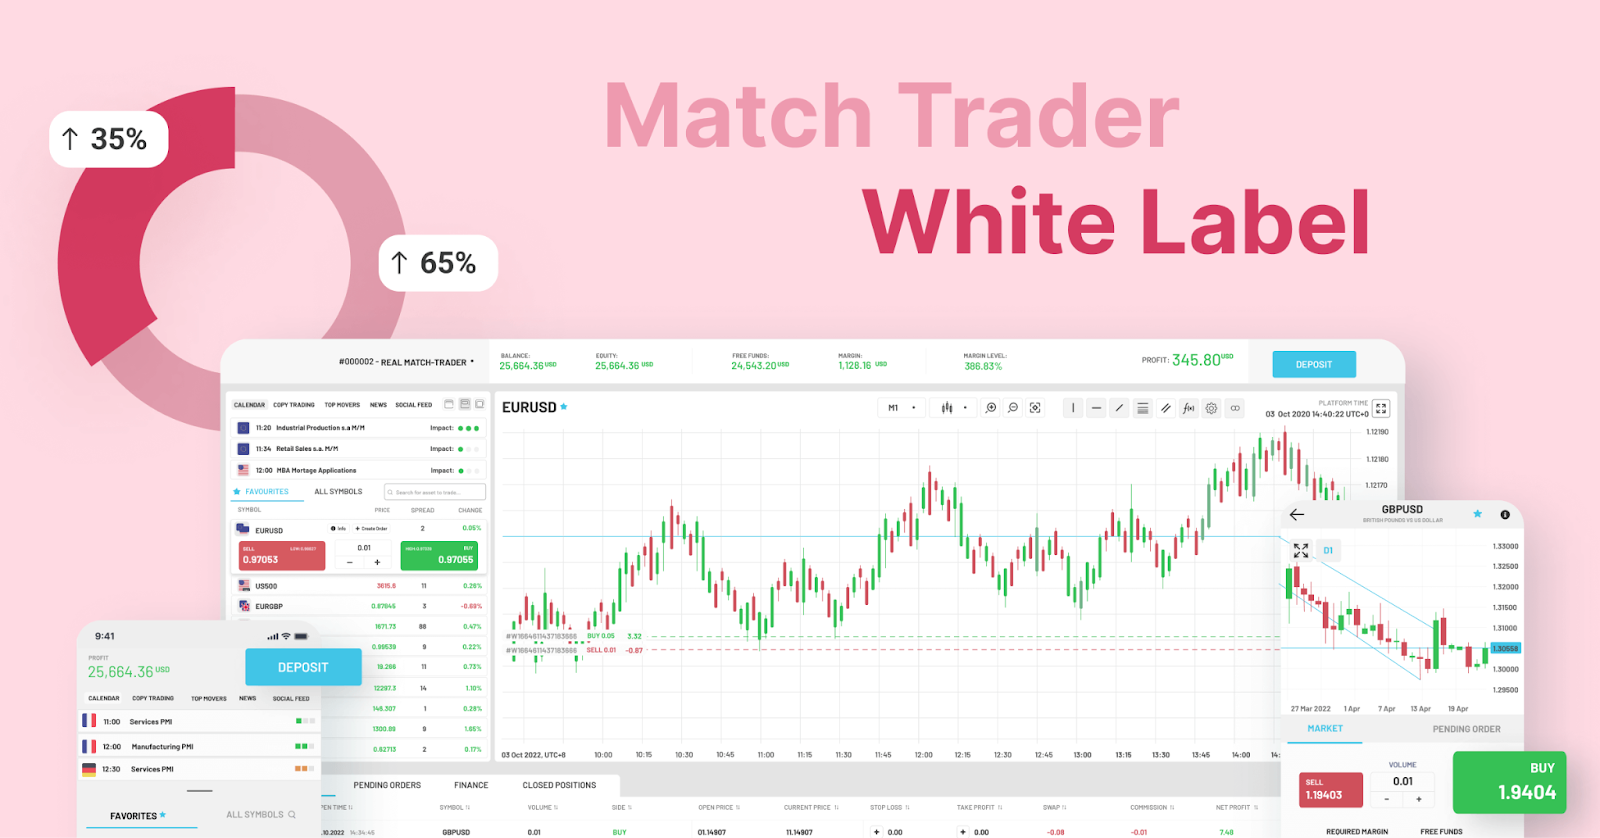 B2Broker Launches Match Trader White Label Solution To Help Brokerage Businesses Build a Full-Fledged Trading Platform 1